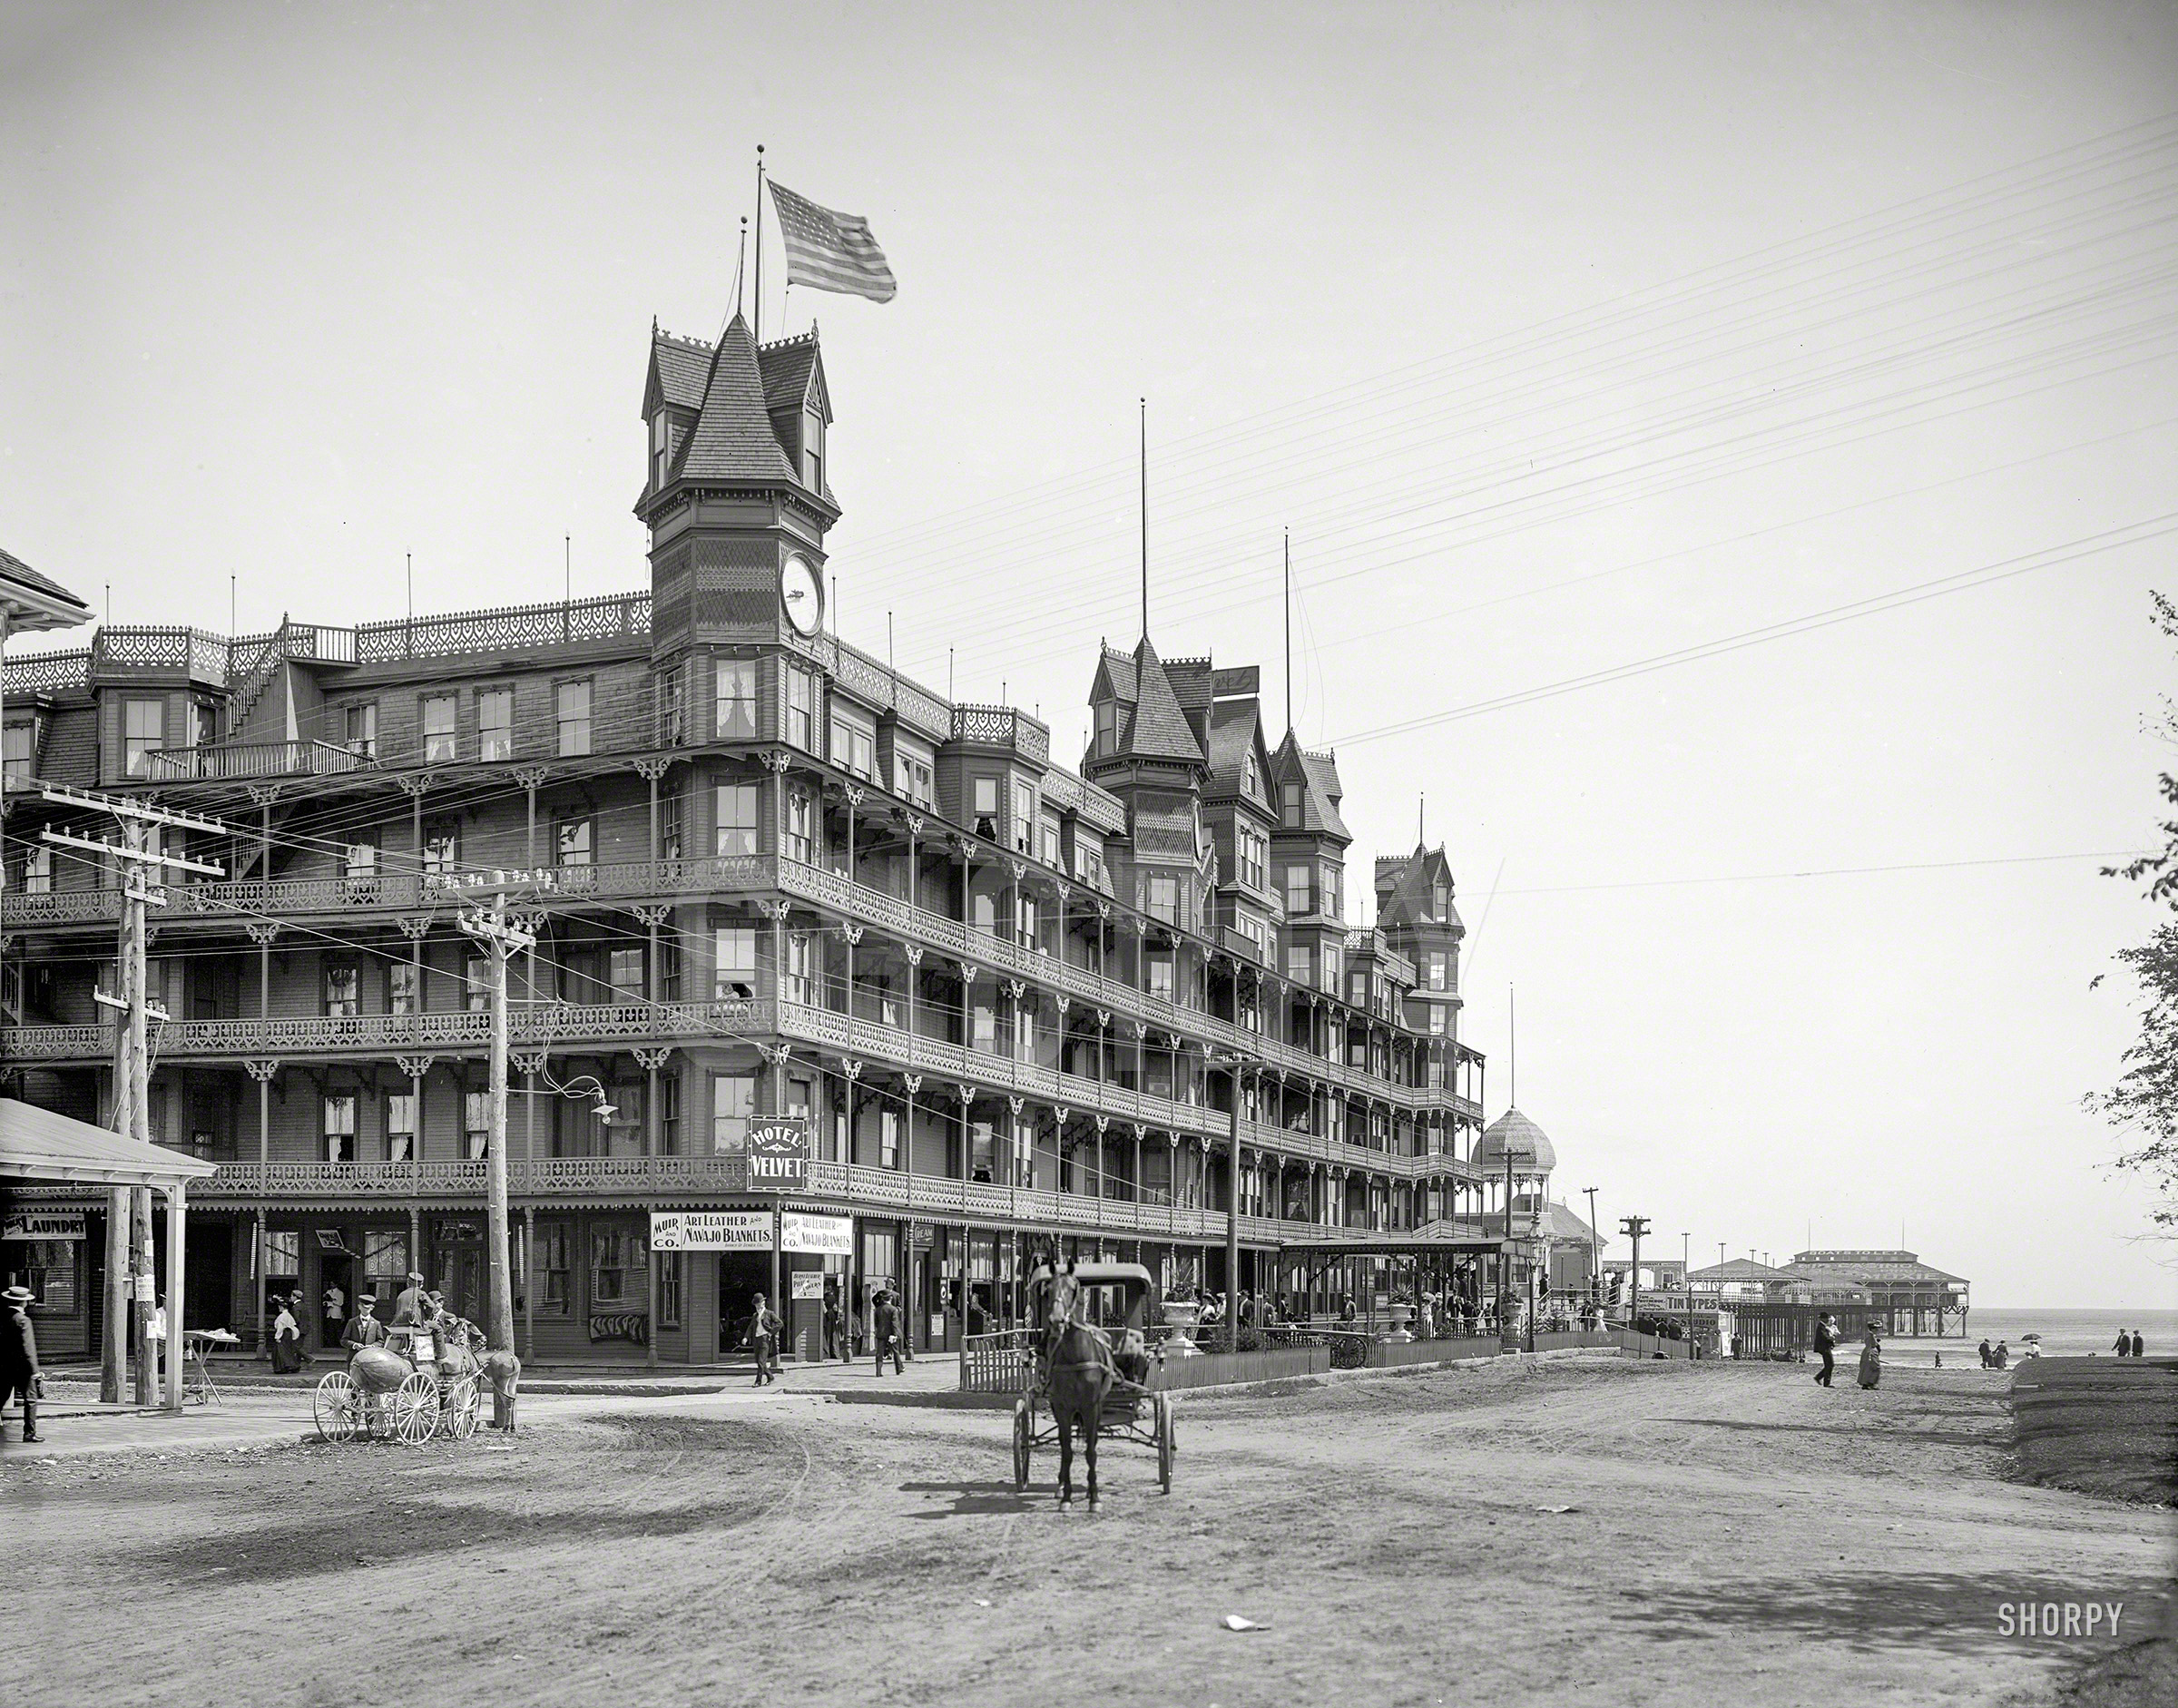 1904. "Hotel Velvet, Old Orchard, Maine." The seaside resort and its ocean pier. Three years later, in a denouement that Shorpyites can recite in their sleep, the place burned to the ground. 8x10 inch glass negative. View full size.